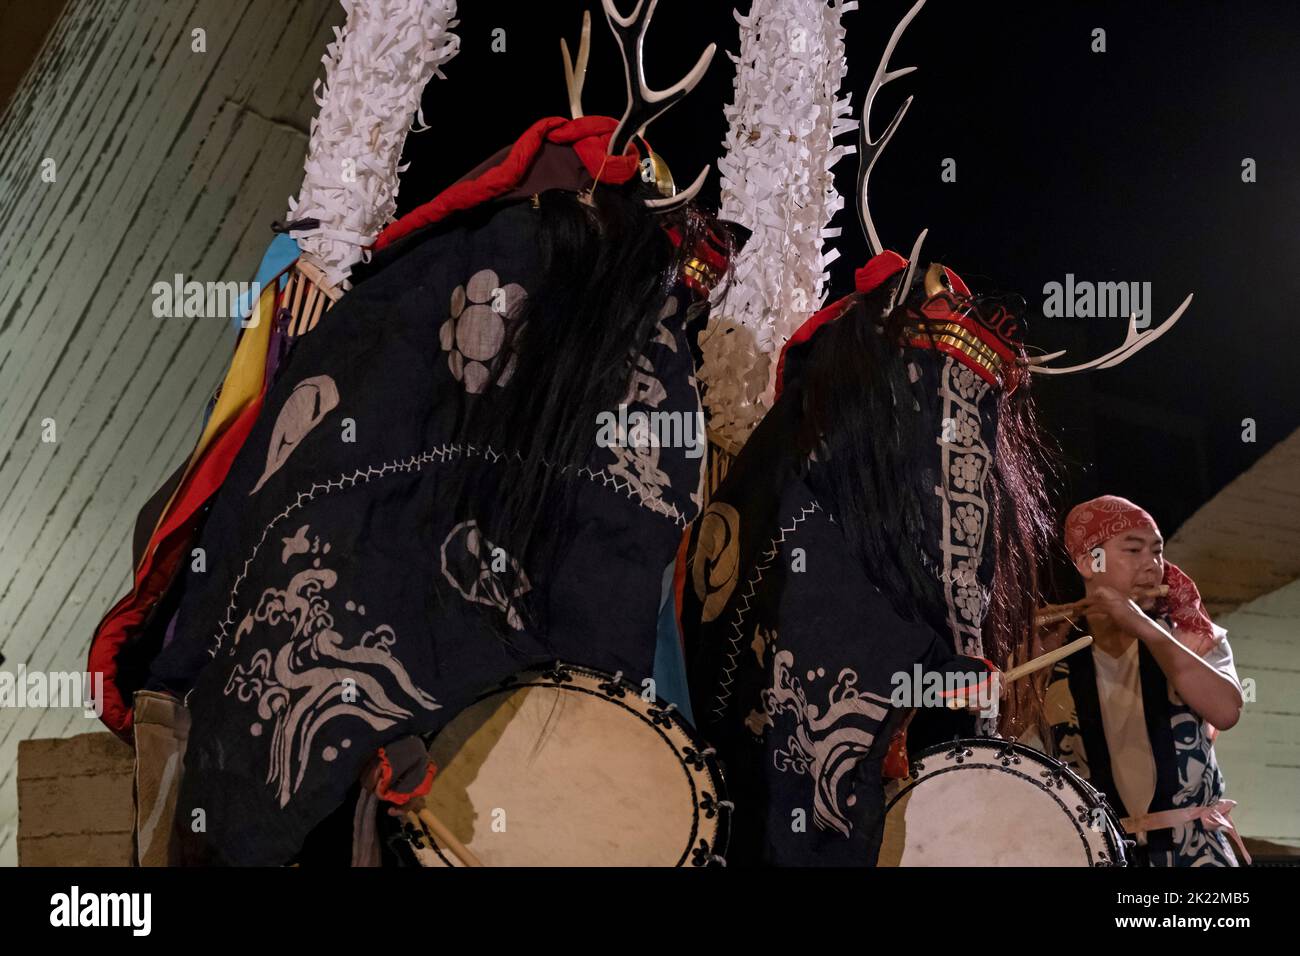 Japanese dancers perform the folk ritual Shishi-odori Deer dance in which dancers wear decorative deer heads with antlers during Israel Festival in Jerusalem. Originally,Shishi-odori belongs to Shinto (Nature worship) and was ancient ritual for nature gods and hunted animals. Stock Photo